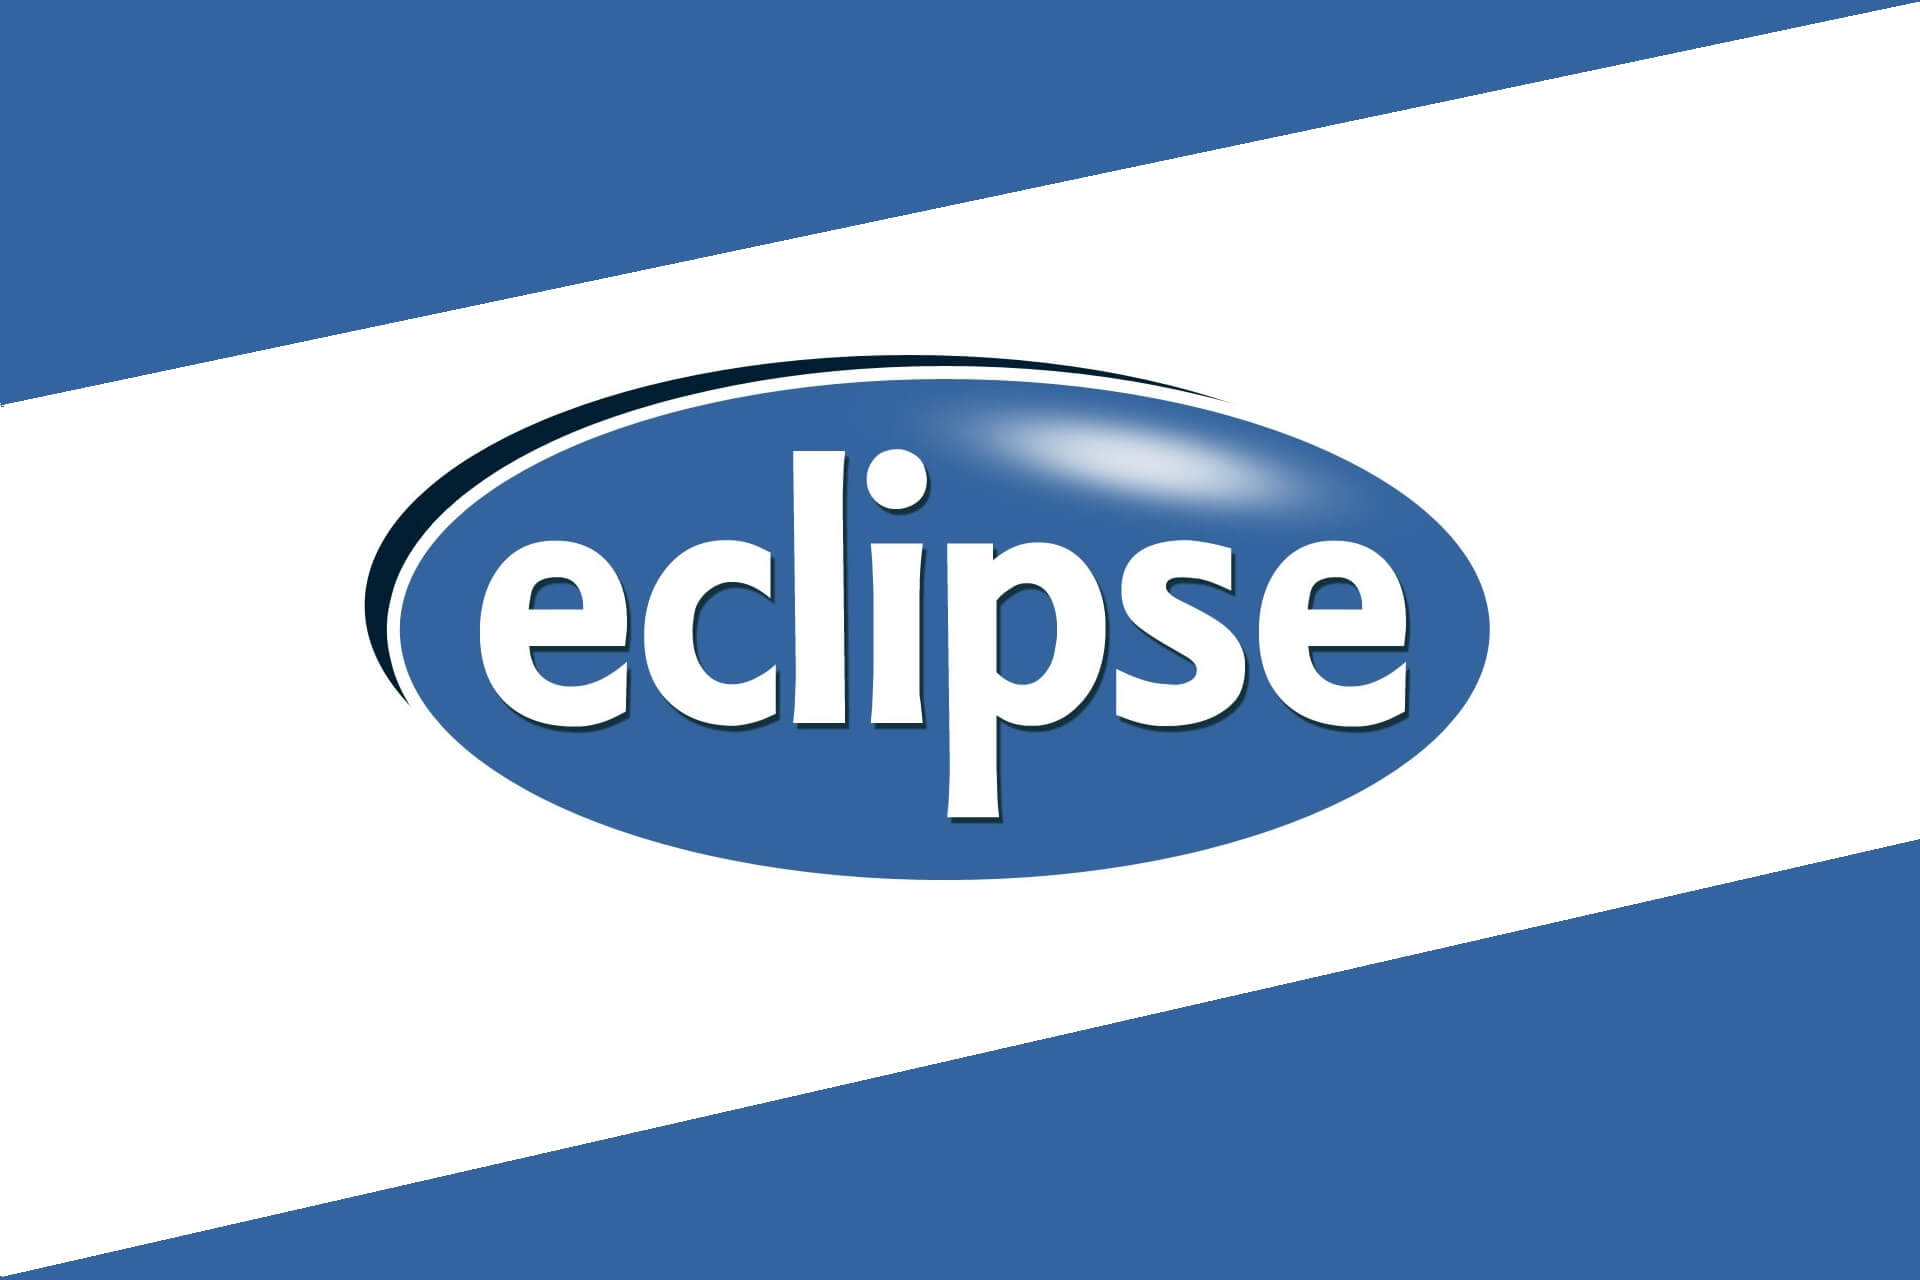 Stop Motion Pro Eclipse free download & review